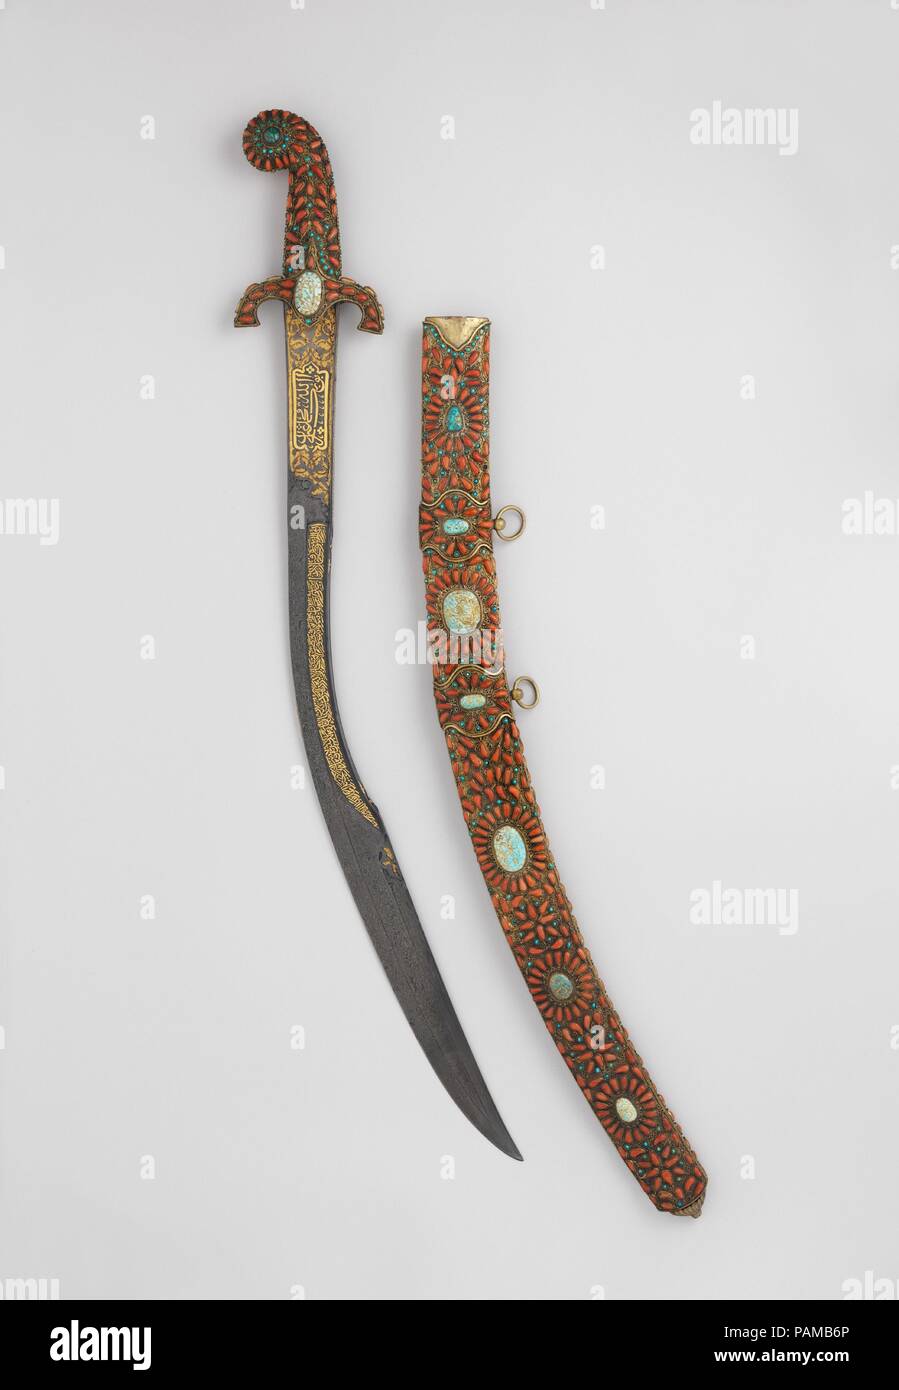 Sword (Kilij) with Scabbard. Culture: Turkish. Dimensions: L. 35 1/2 in. (90.2 cm). Date: 19th century.  The inscriptions on the sword invoke Allah, the Prophet Muhammad, and 'Ali. The stones adorning the hilt and scabbard of the sword have talismanic significance. According to scholar Al-Biruni's eleventh-century manuscript <i>Kitab al- Jamahir</i> (Book of Precious Stones), coral was believed to prevent misfortune and turquoise to avert the evil eye. Museum: Metropolitan Museum of Art, New York, USA. Stock Photo